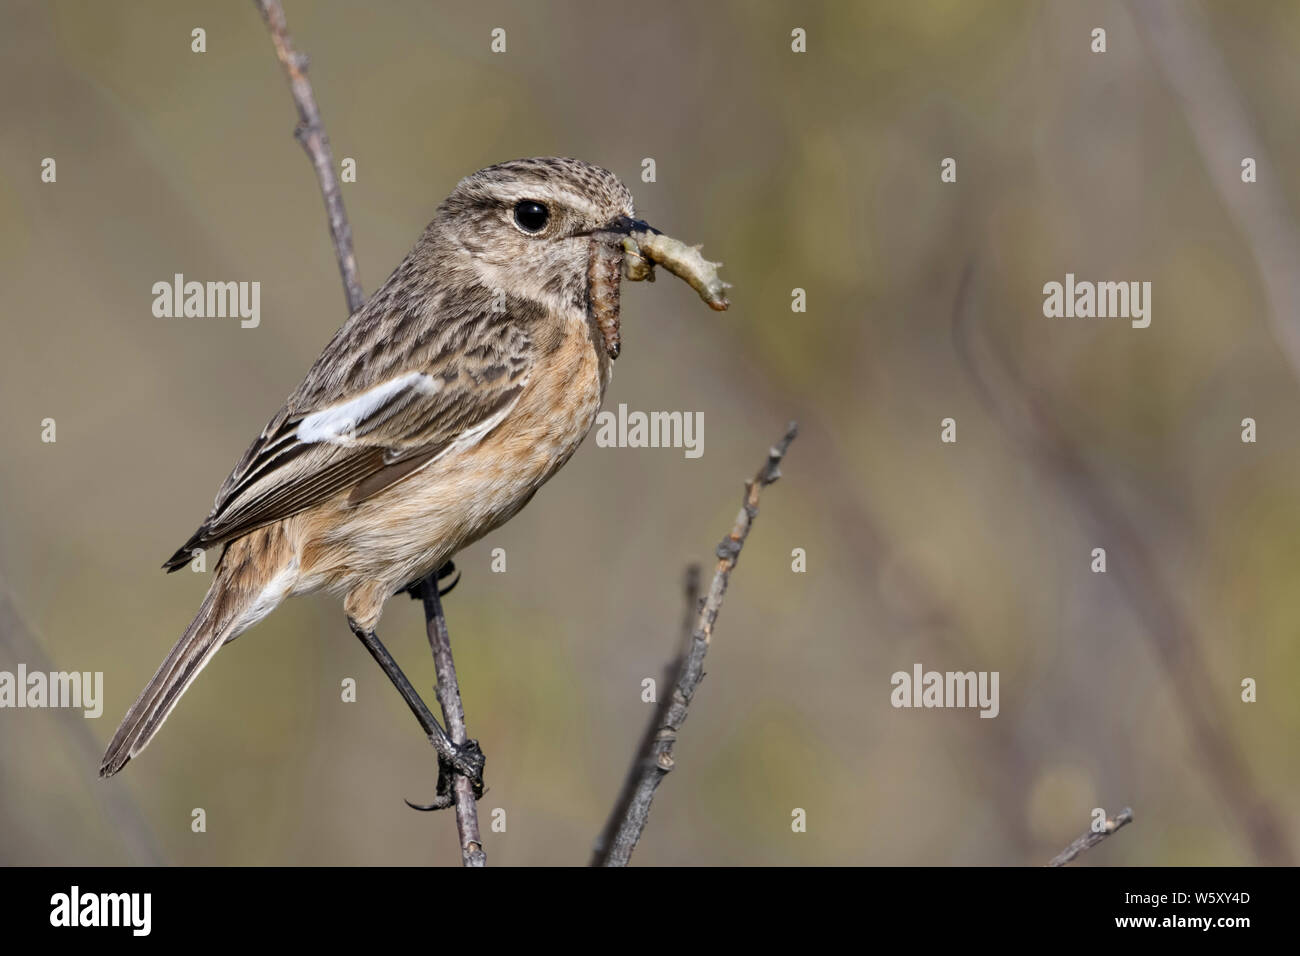 European Stonechat ( Saxicola torquata ), female, perched on top of a branch, twig, with prey (grubs) in beak to feed young, wildlife, Europe. Stock Photo